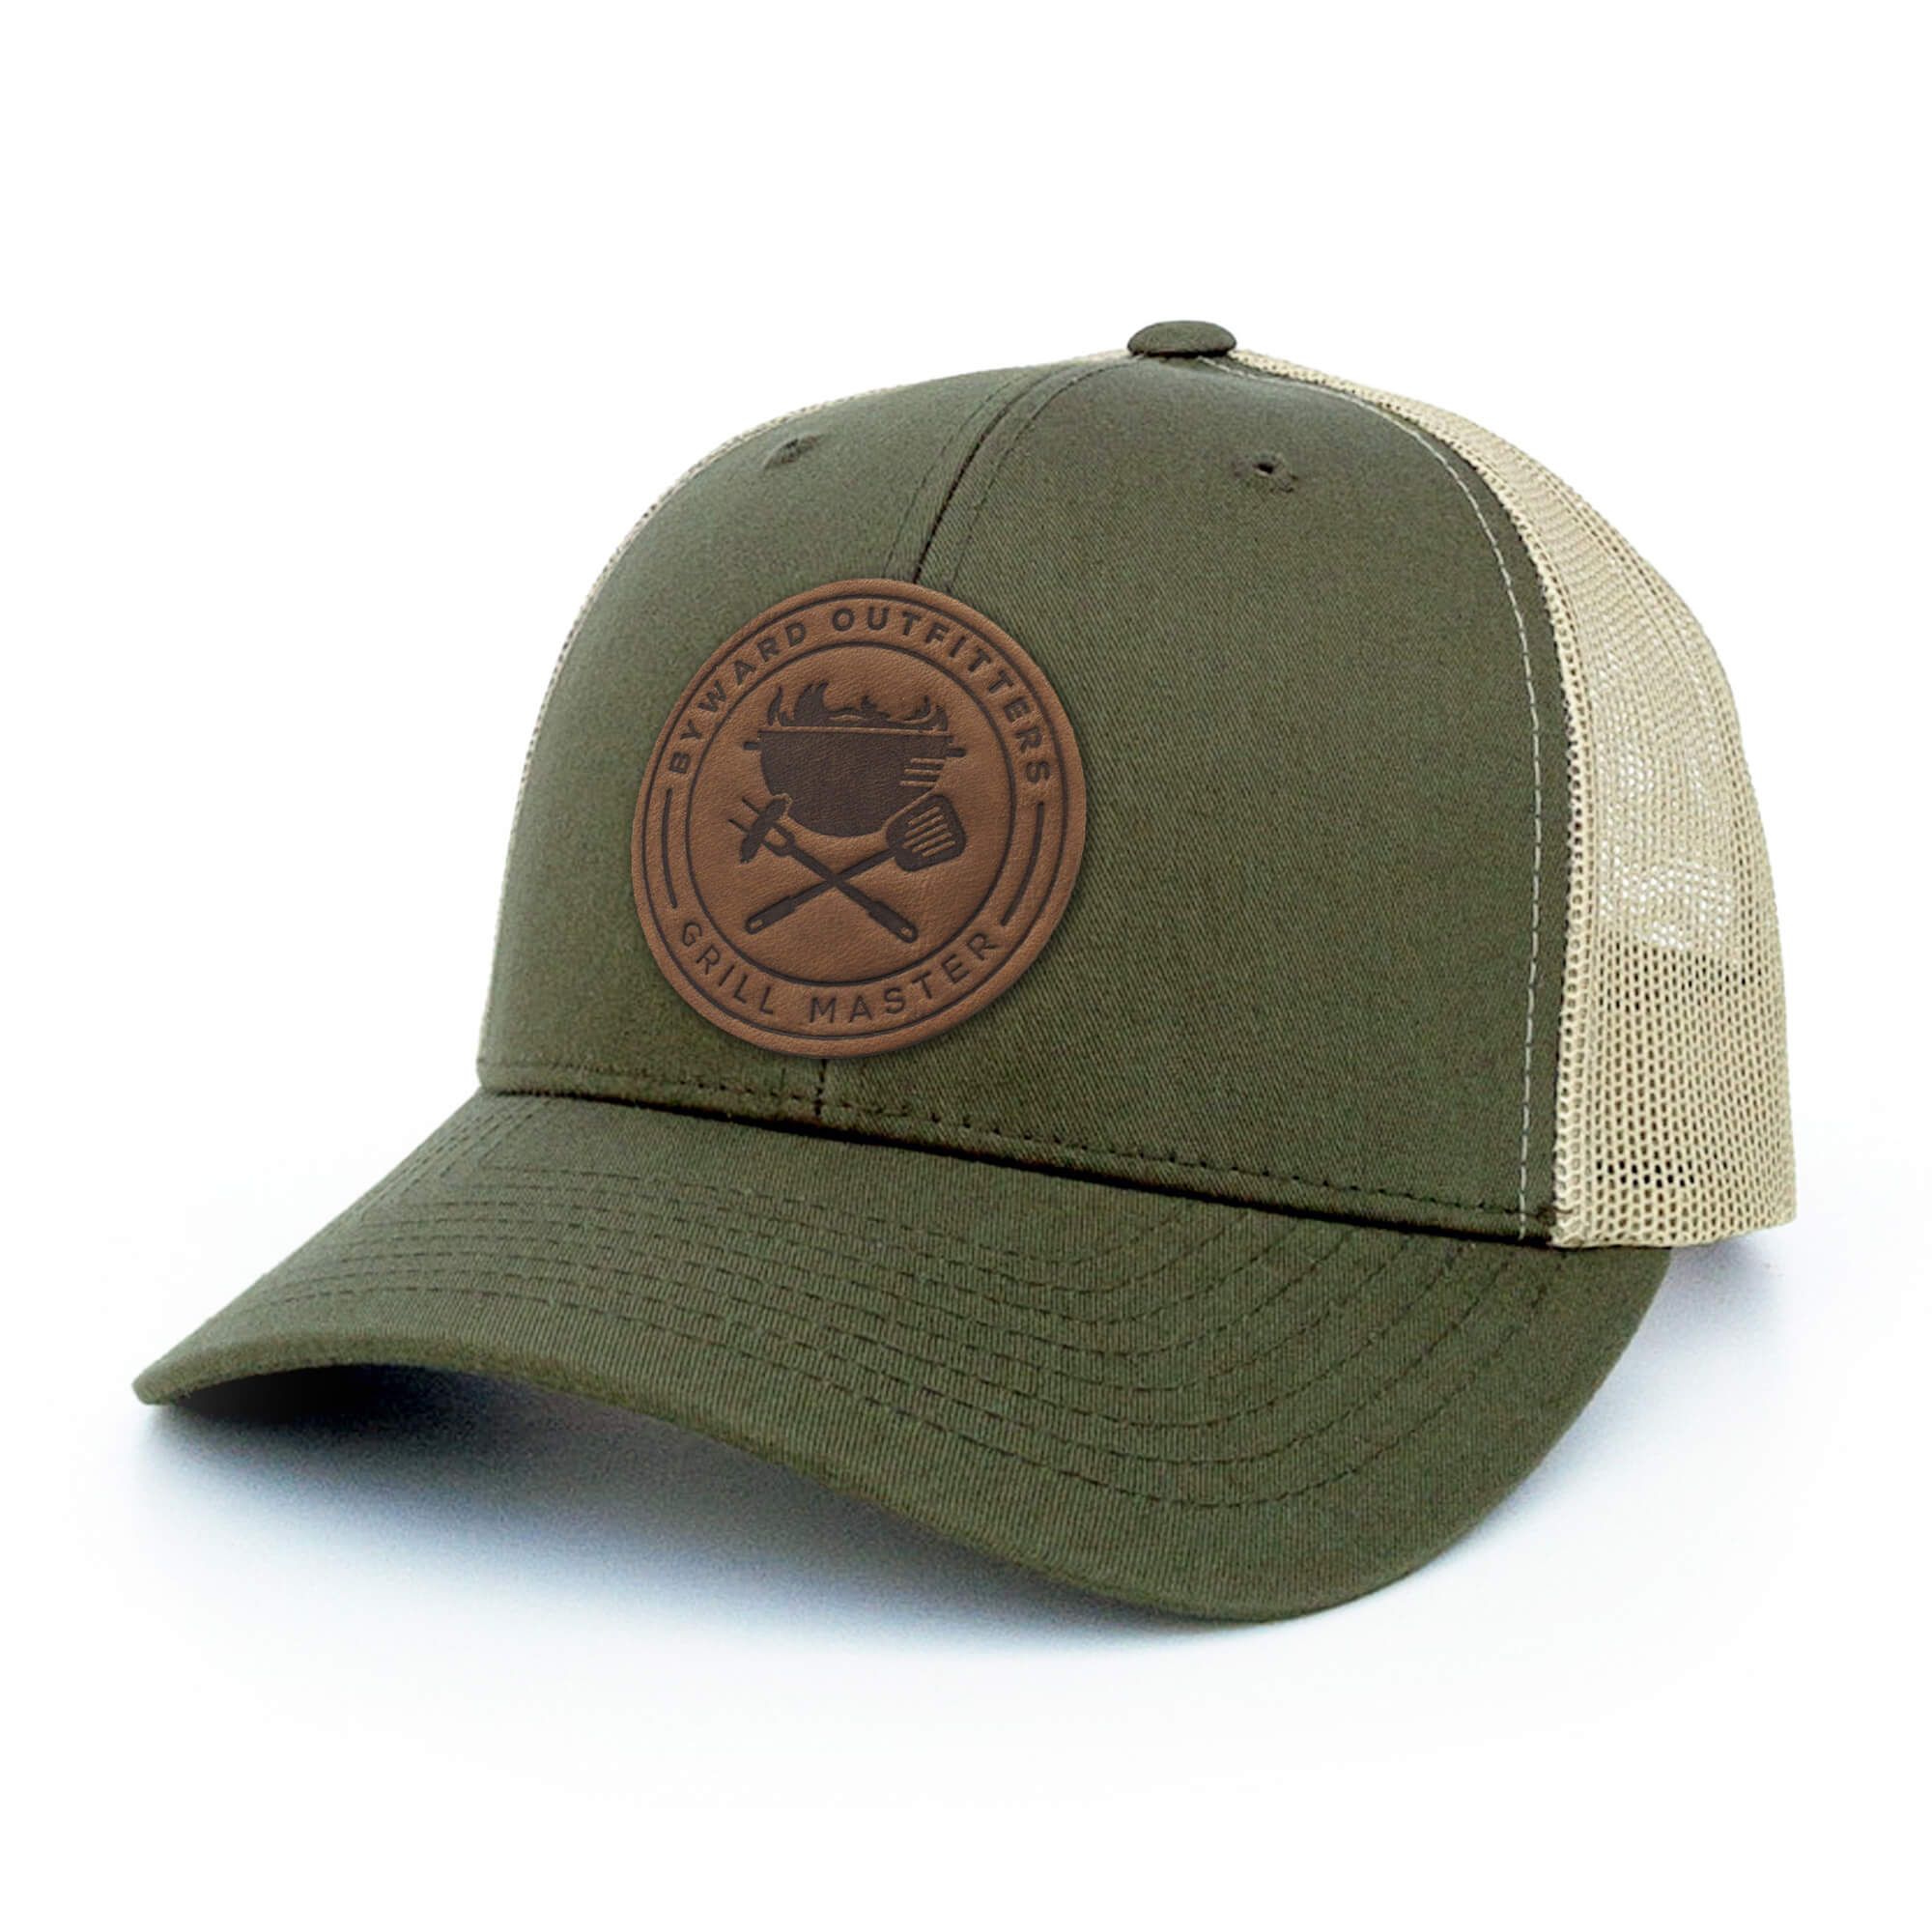 Moss Green and khaki trucker hat with full-grain leather patch of Grill Master | BLACK-006-002, CHARC-006-002, NAVY-006-002, HGREY-006-002, MOSS-006-002, BROWN-006-002